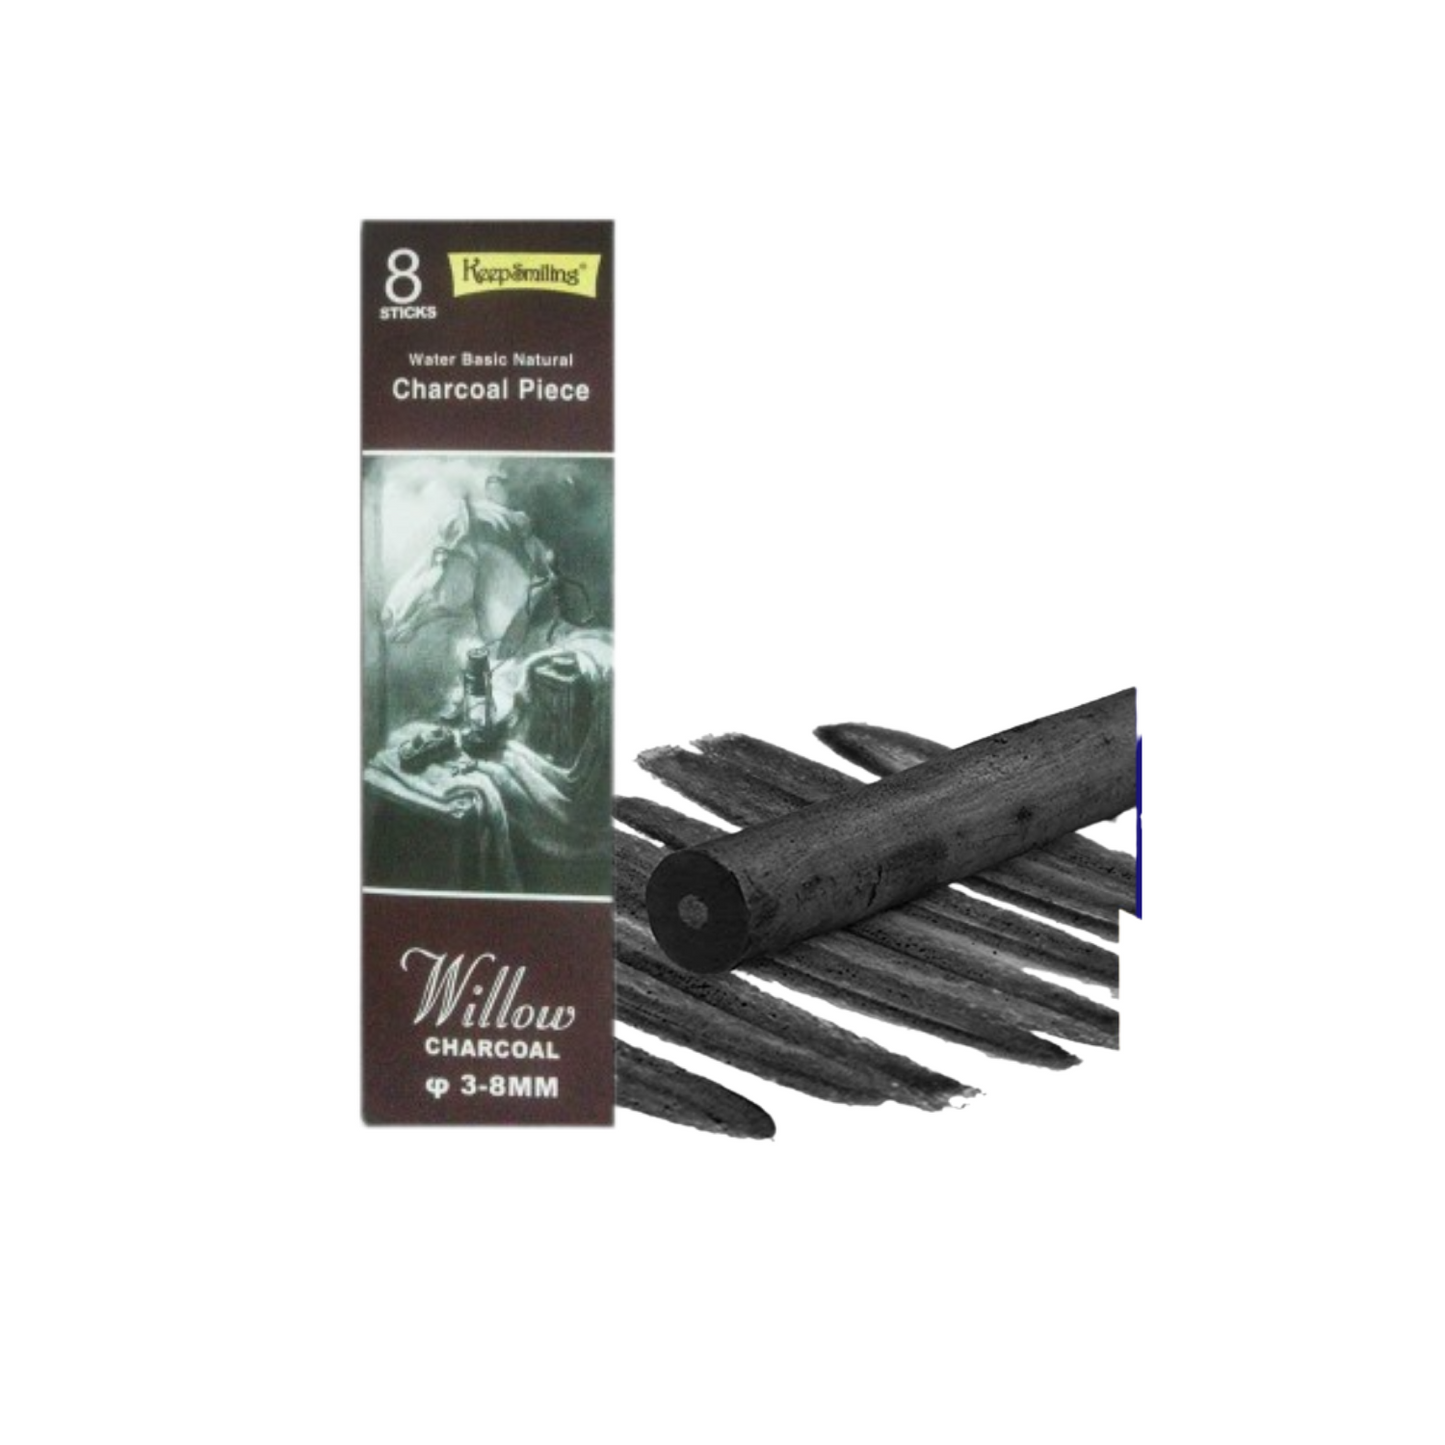 Keep smiling charcoal sticks pack of 8